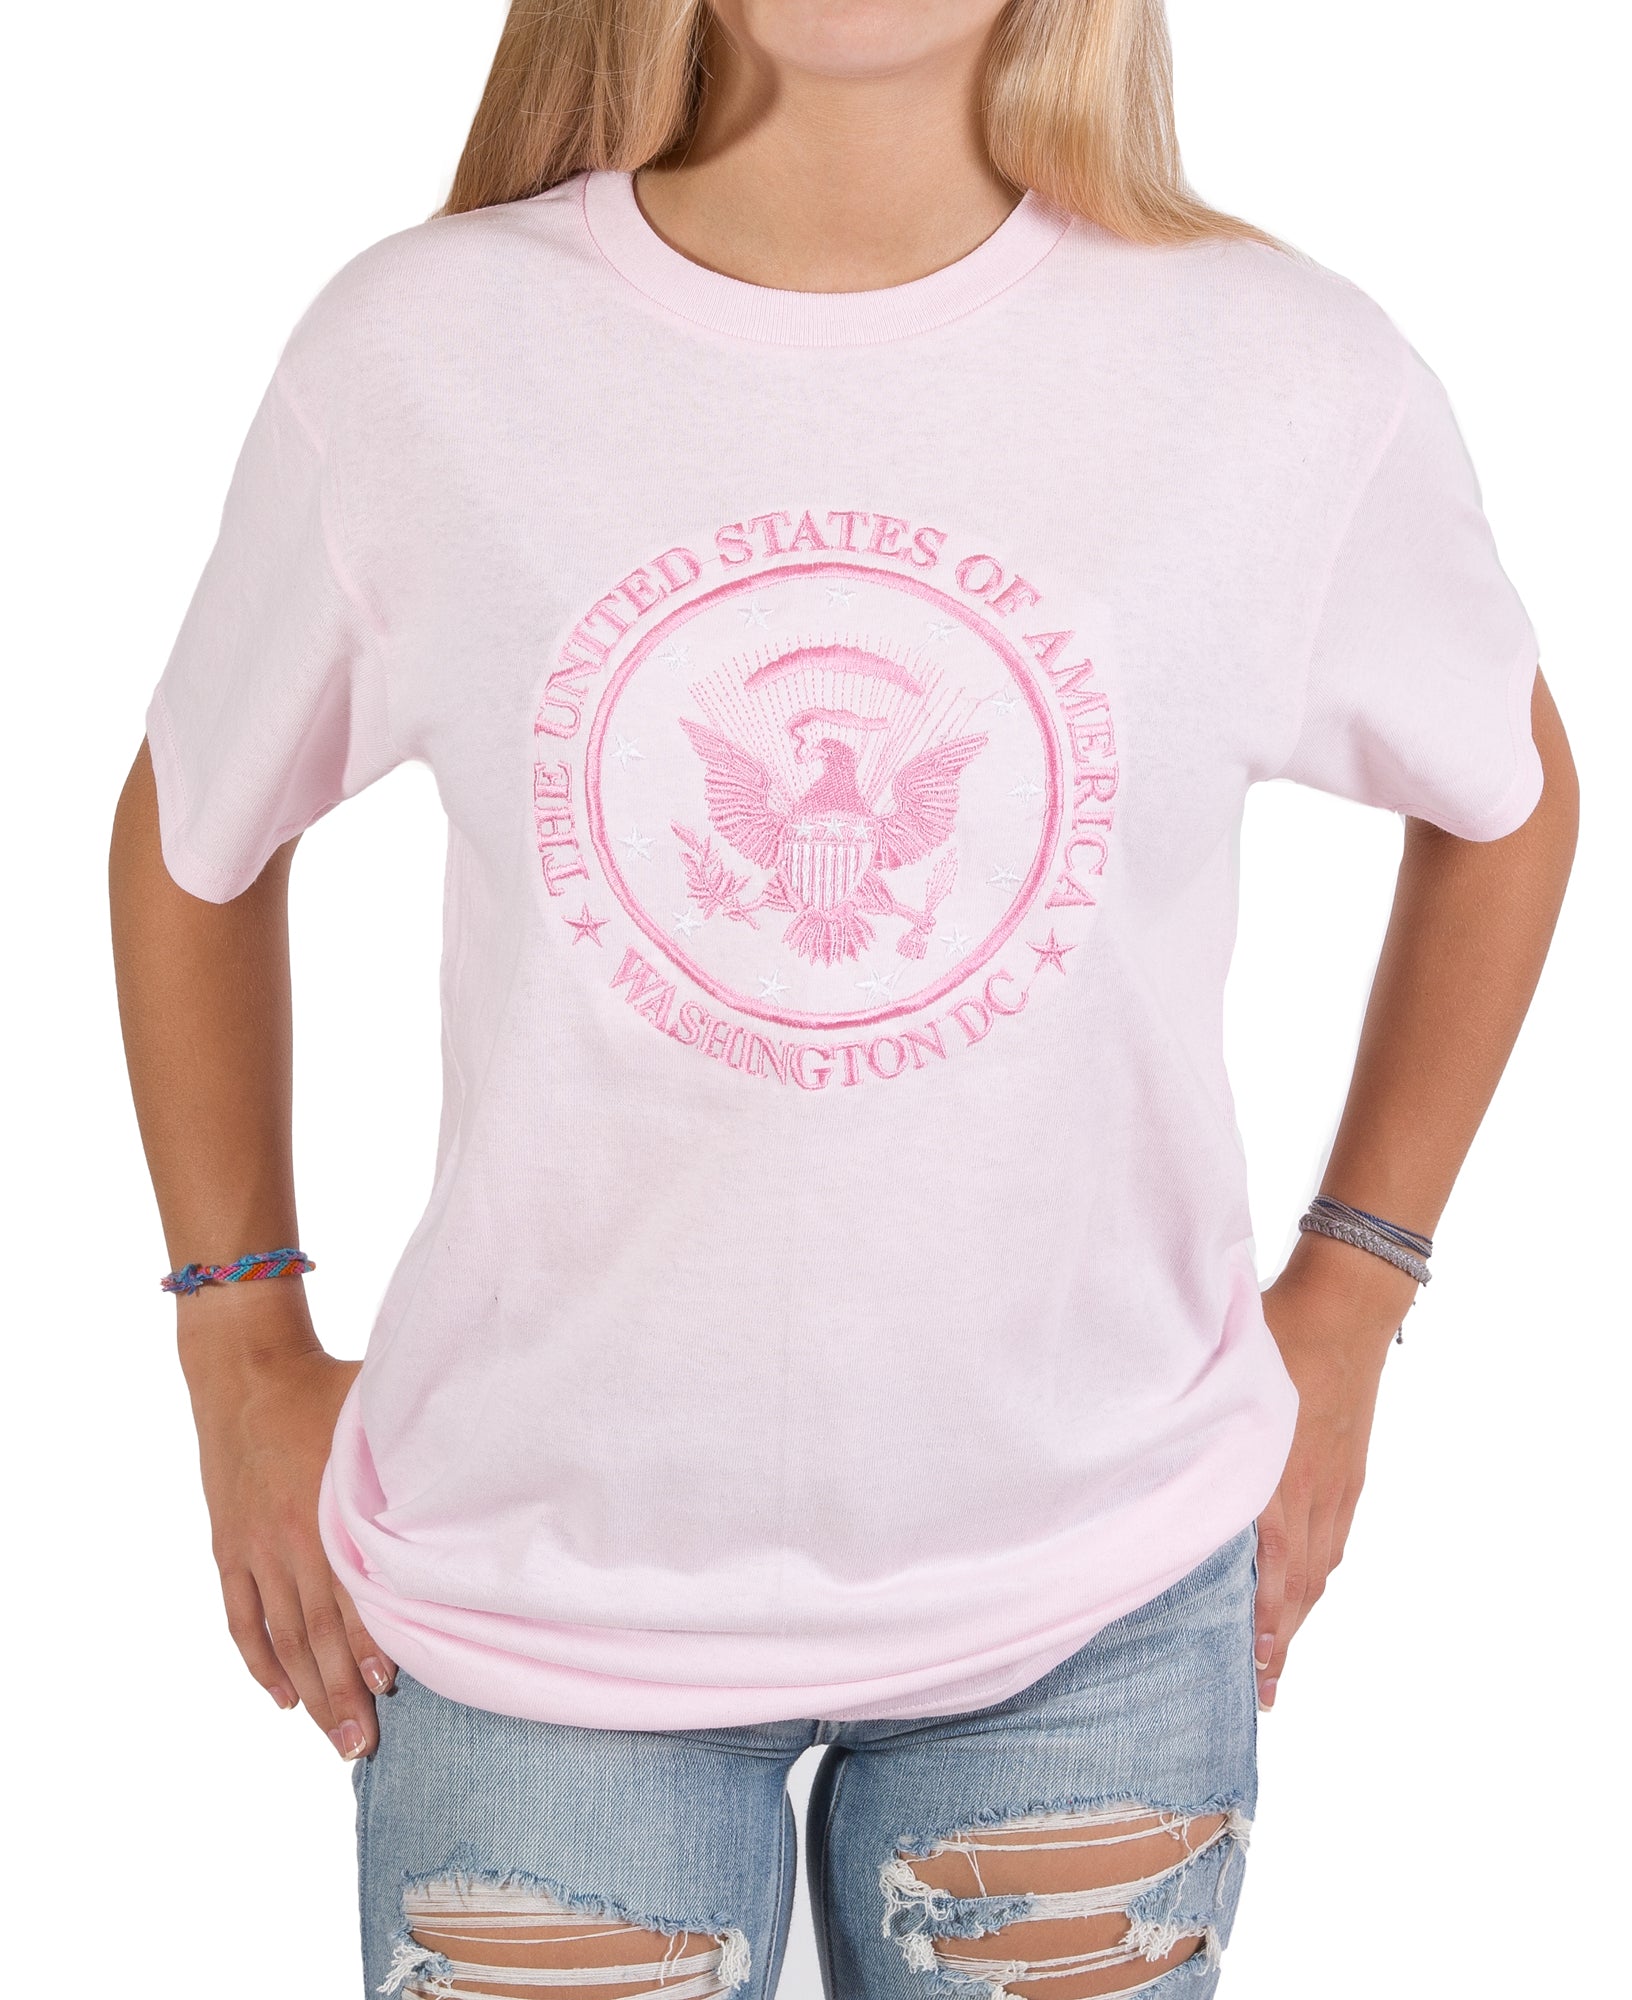 Presidential Seal Embroidered T-Shirt (4 Colors)